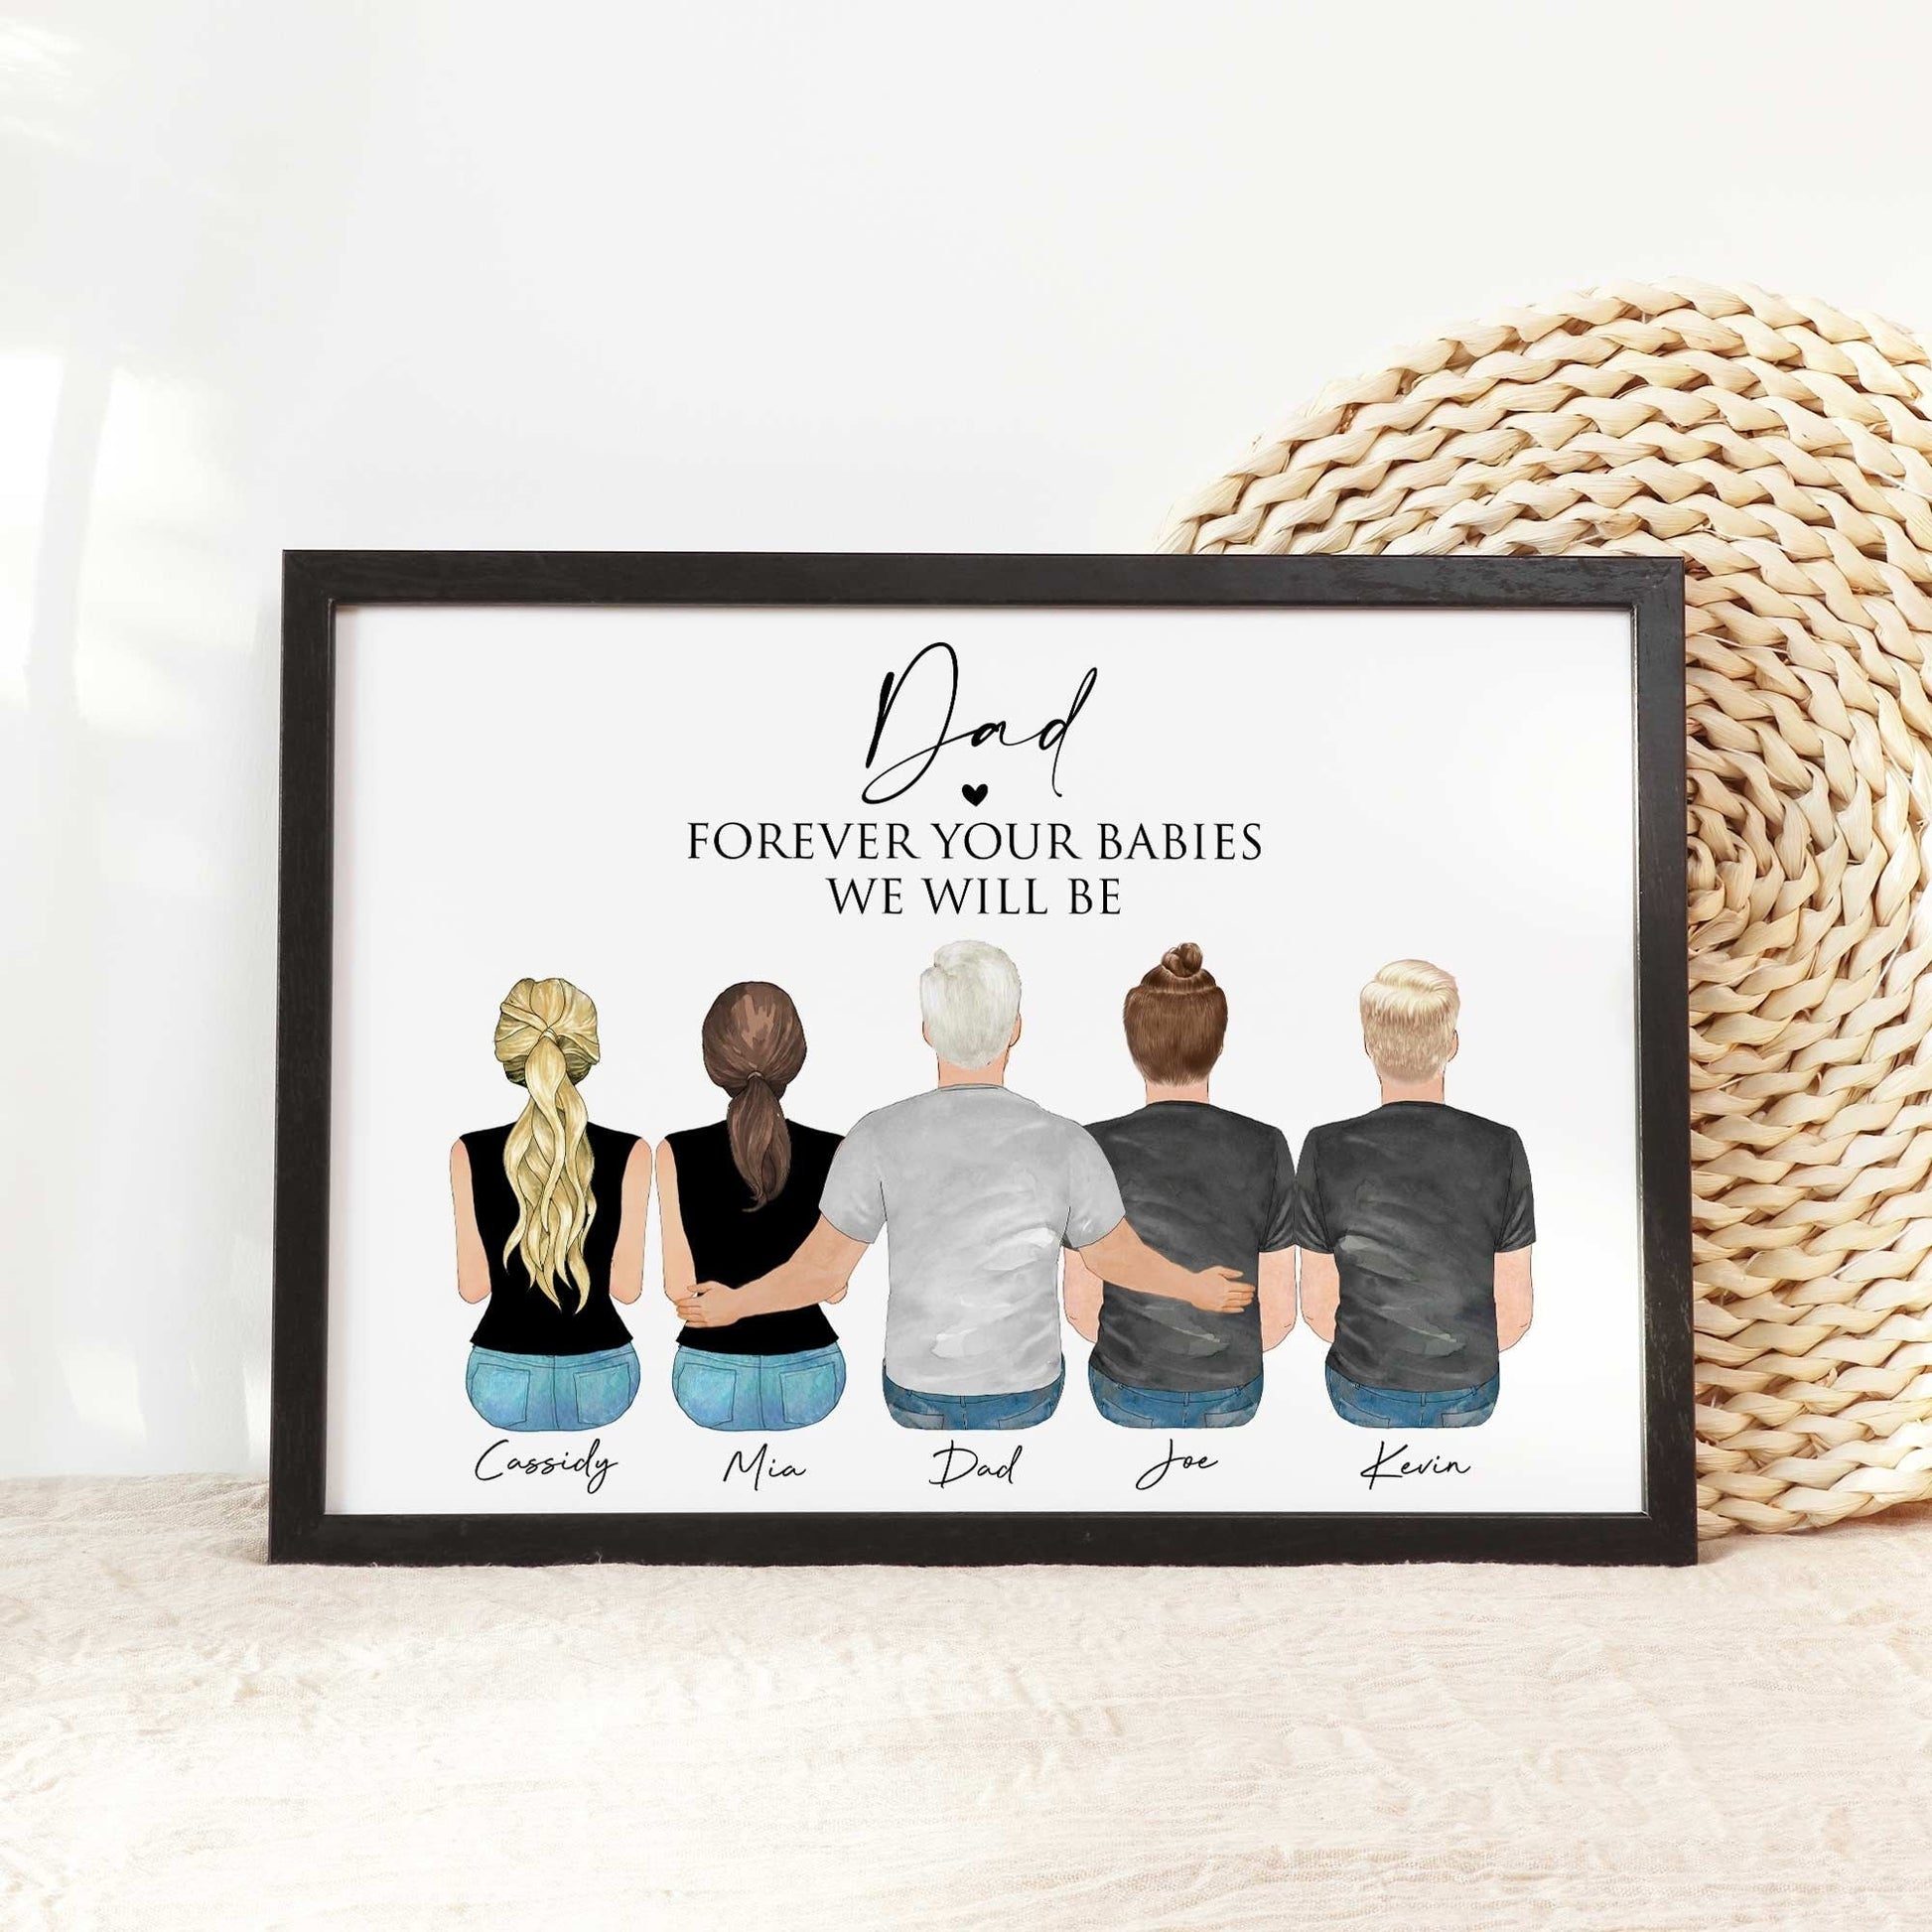 Valentine gift for Dad from Daughter and Son, Personalized Birthday Gift for Dad, Custom Family Portrait, Our Dad Forever Family Wall art